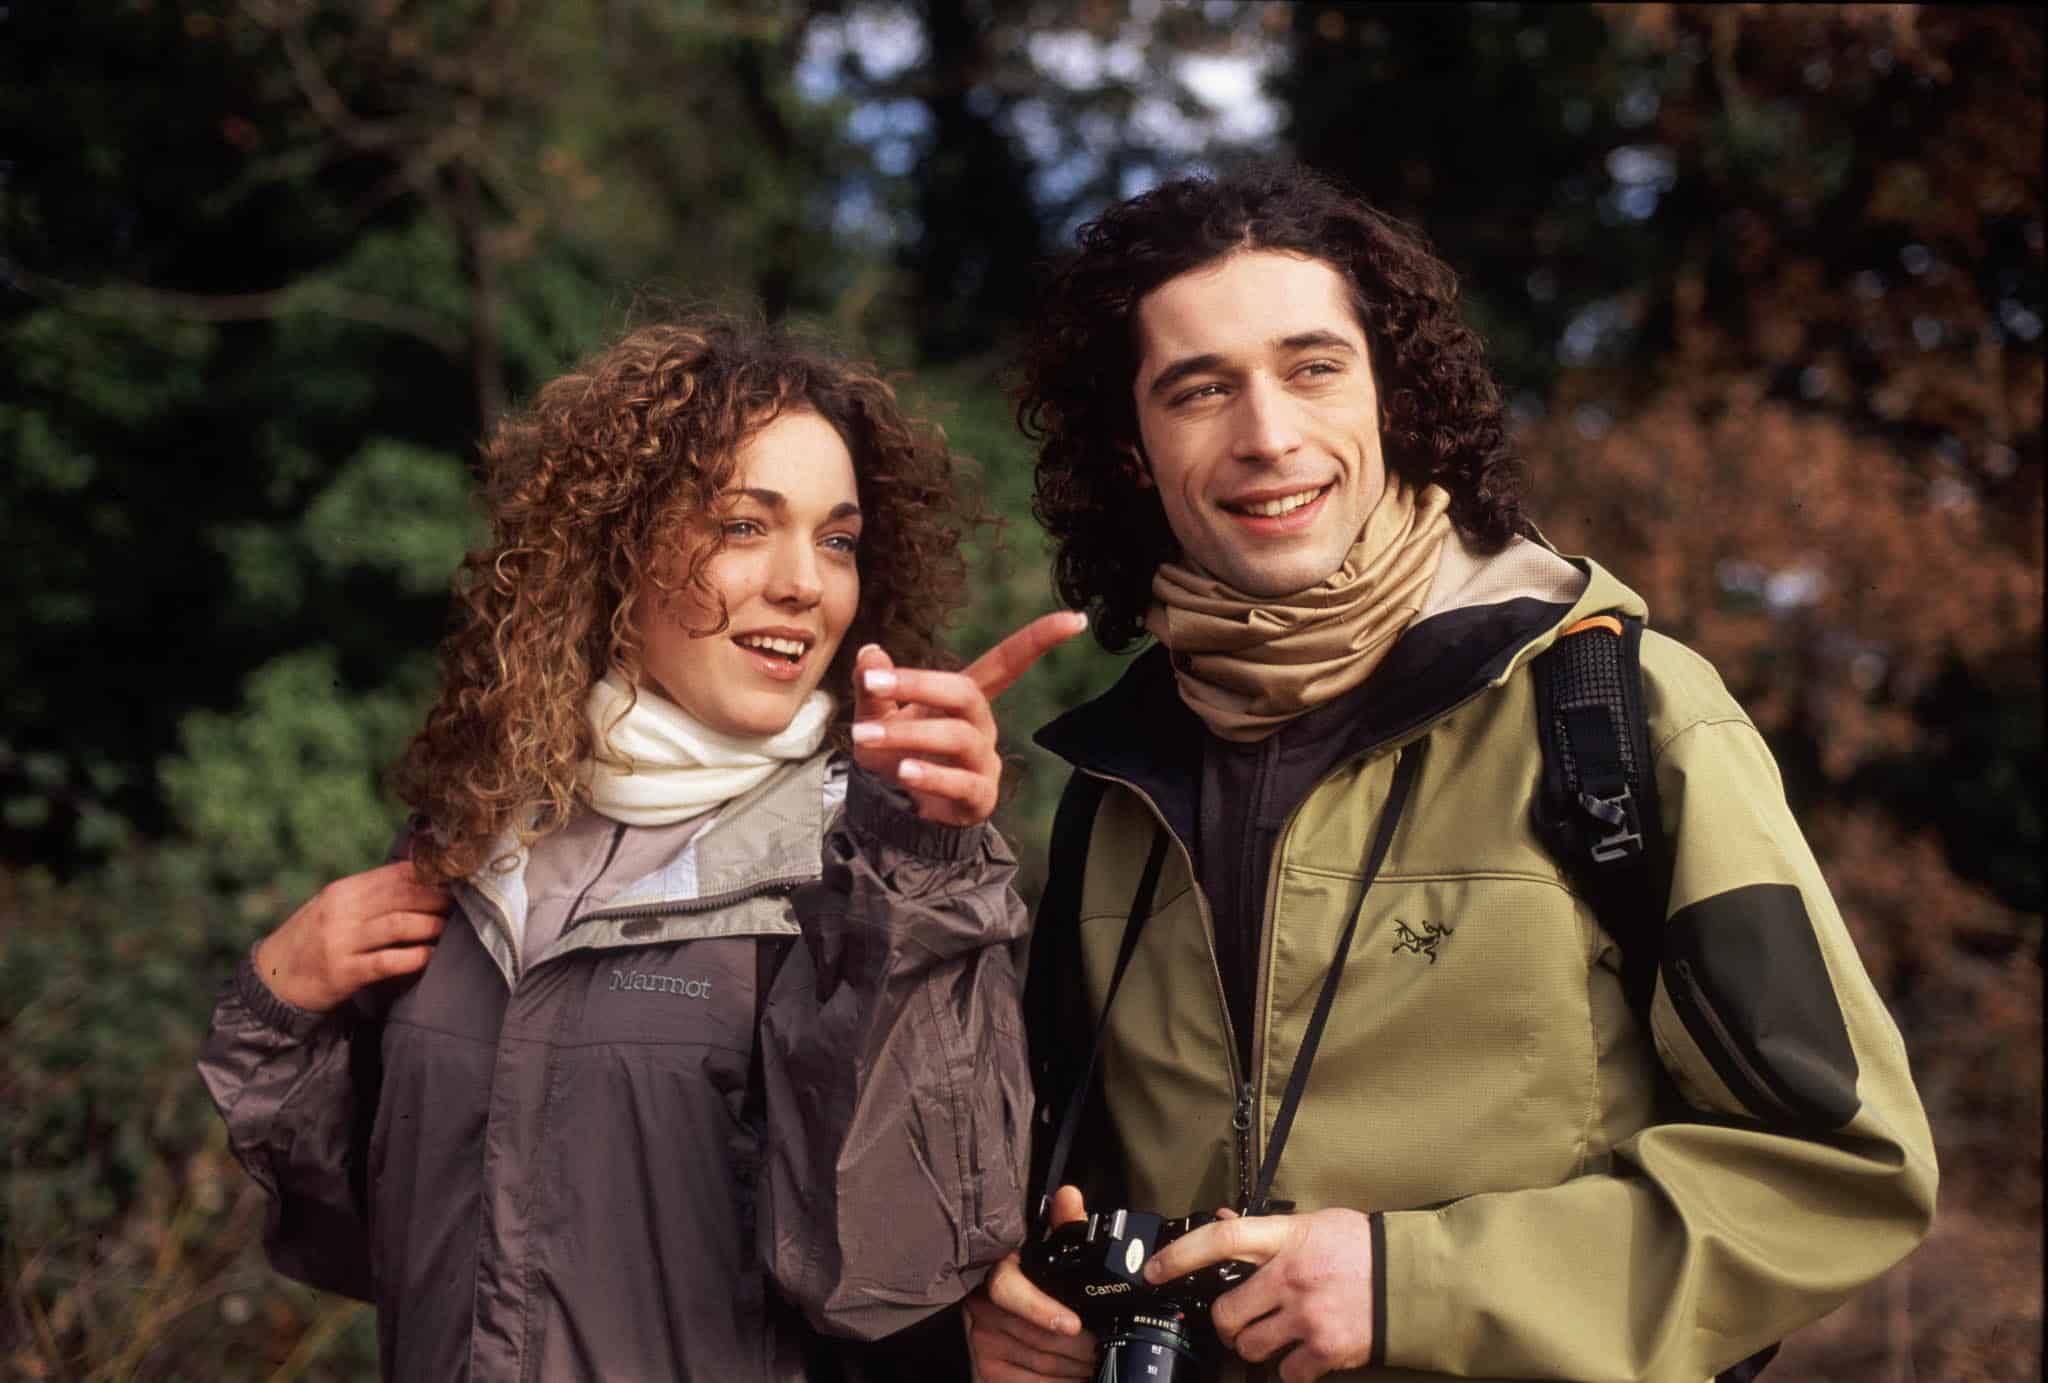 A couple in outdoor clothing during a hike. It looks cold and they are both wearing BUFF® Merino Lightweight multifunctional headwear as scarves. Source: buff.eu